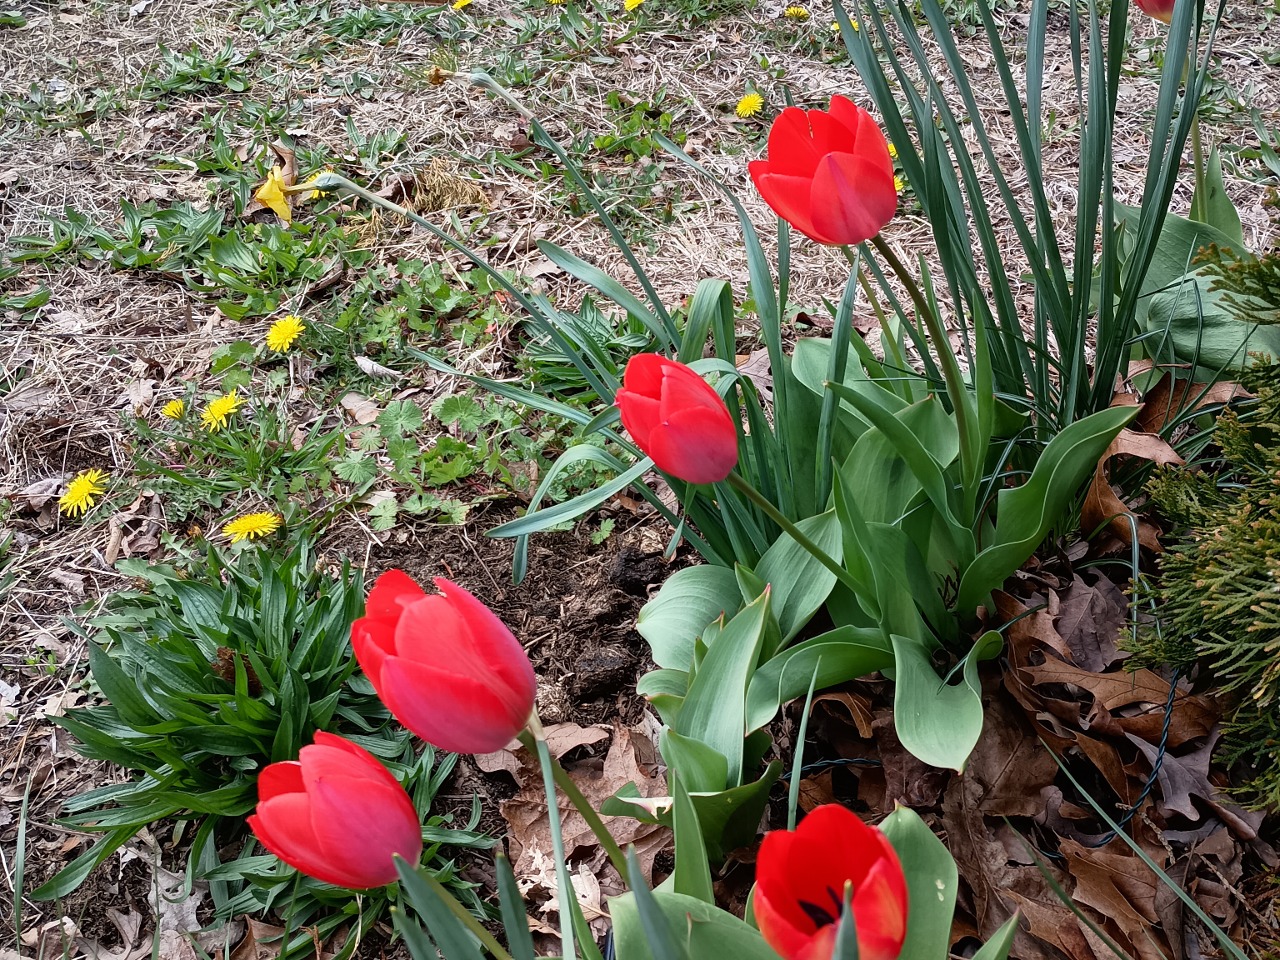 Five red tulips in a garden with dandelions in the background